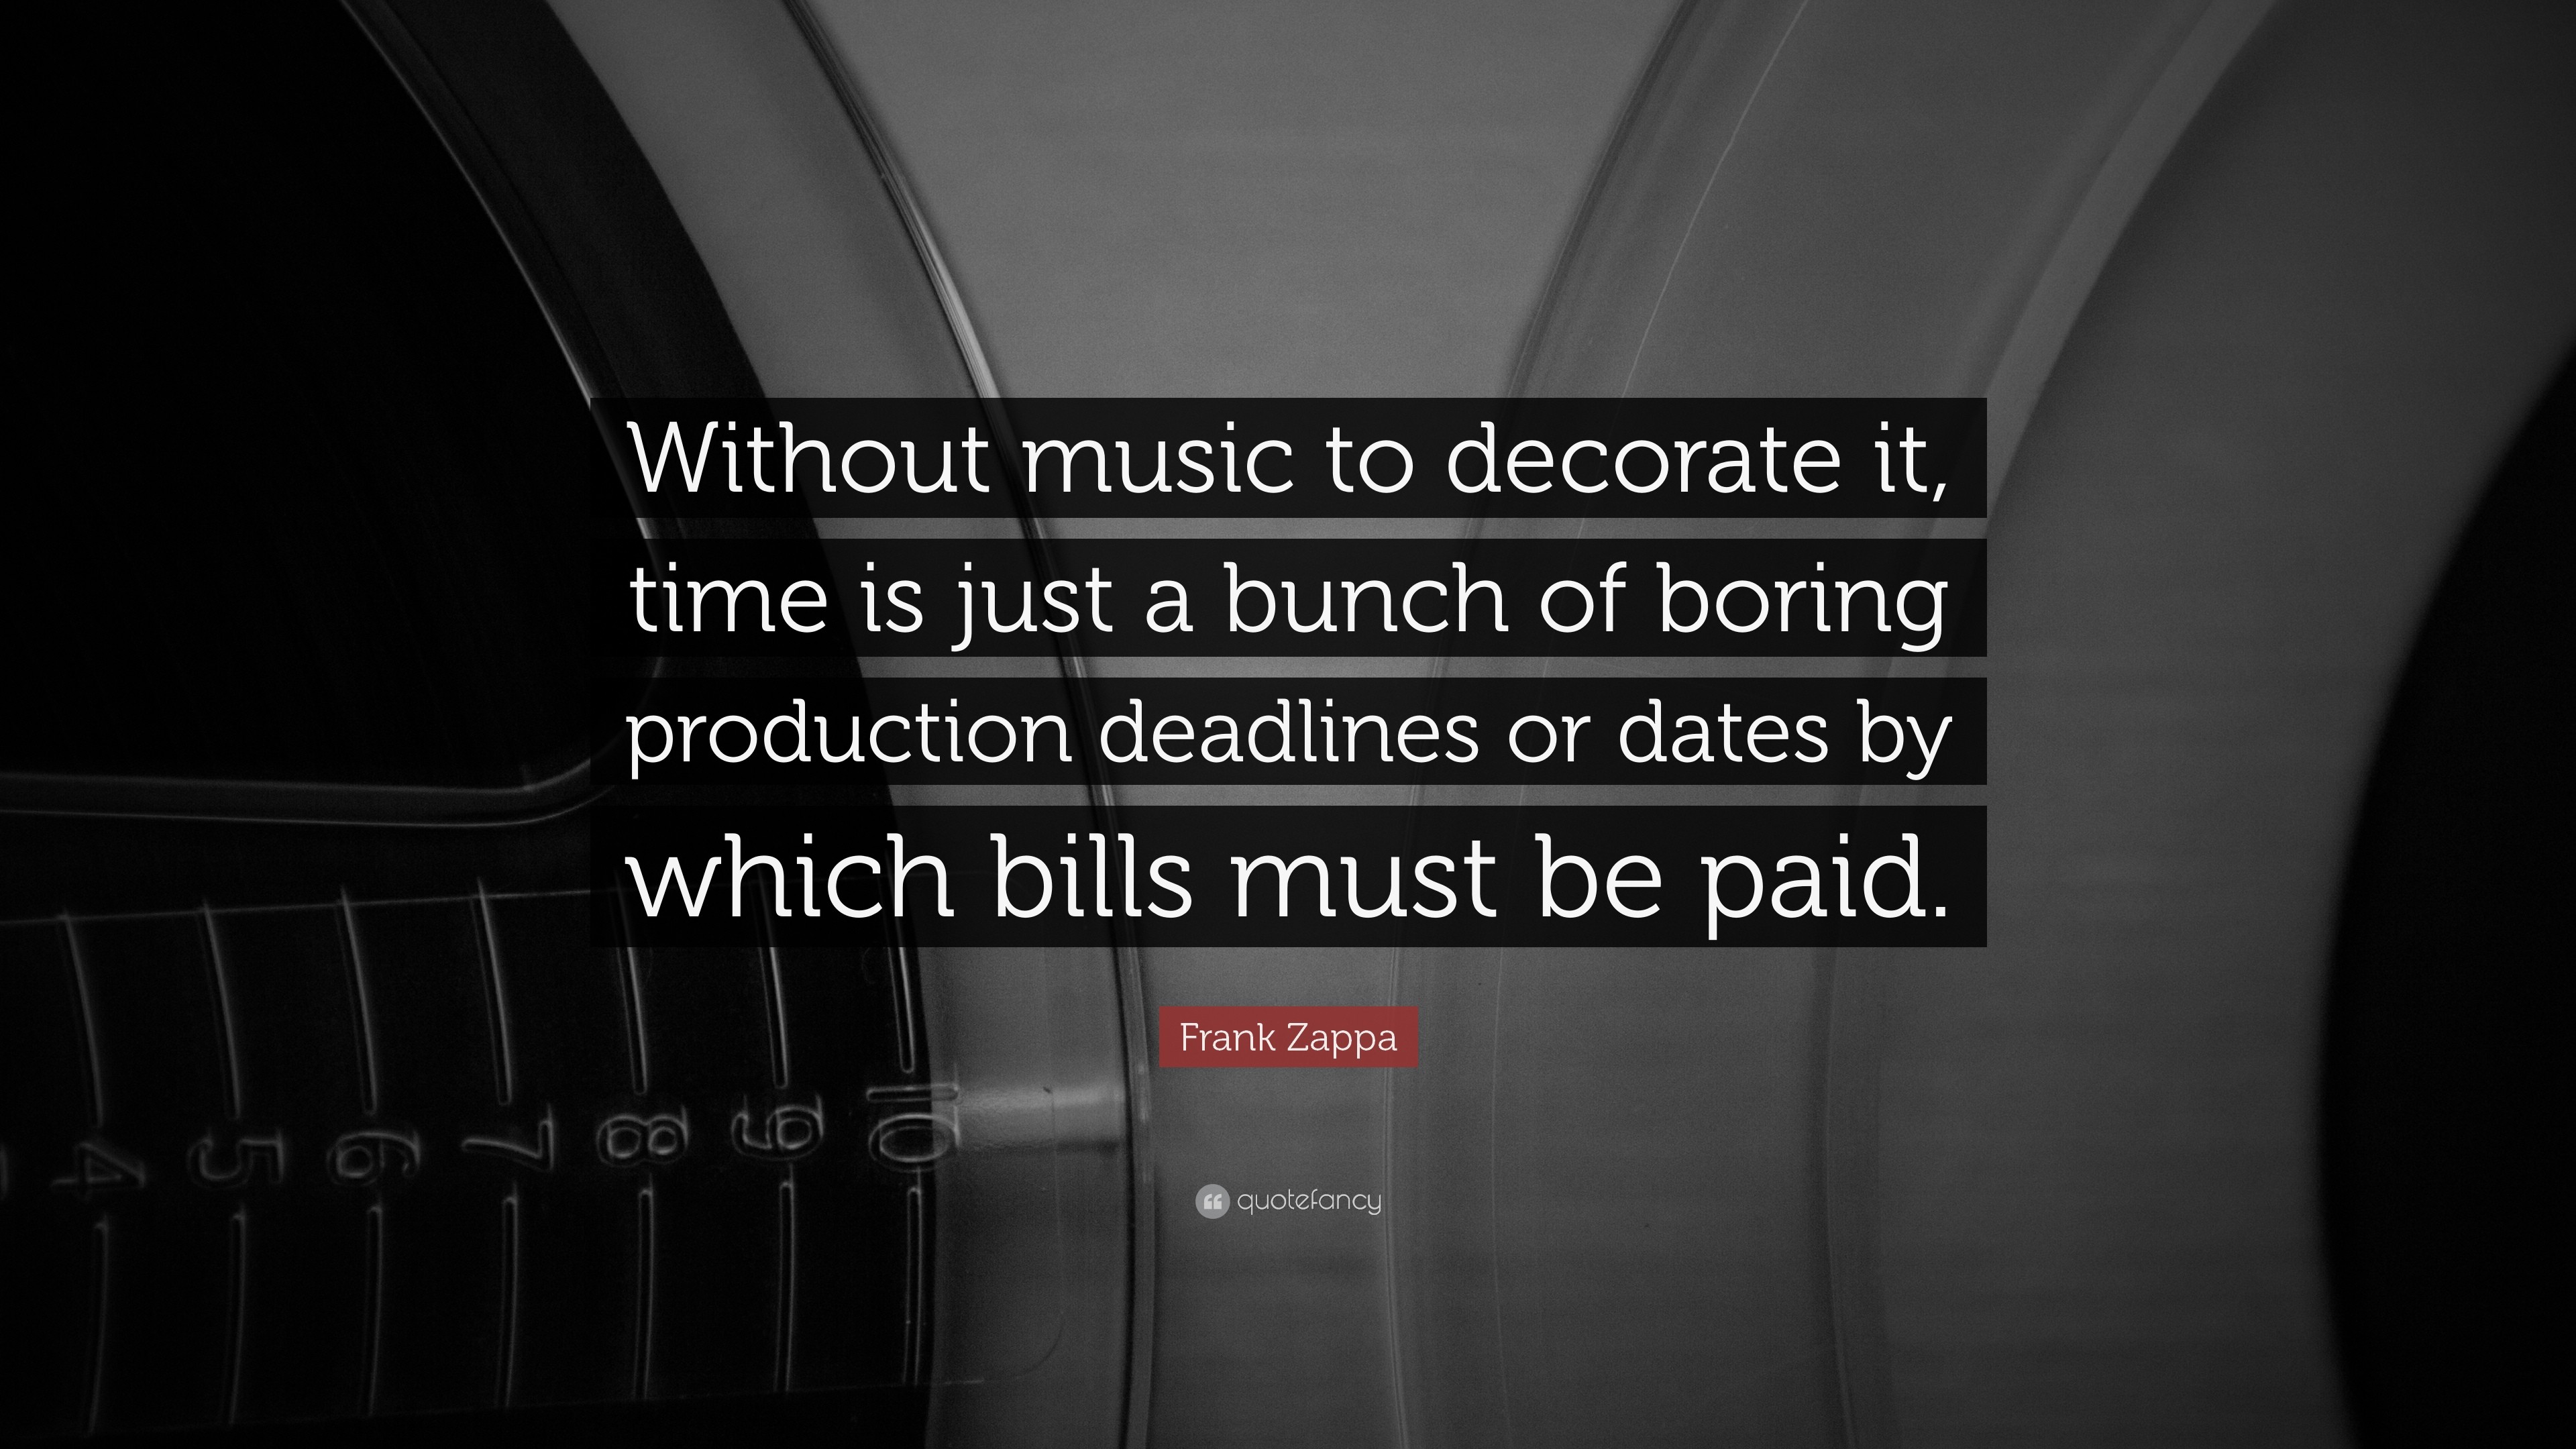 3840x2160 Music Quotes: “Without music to decorate it, time is just a bunch of